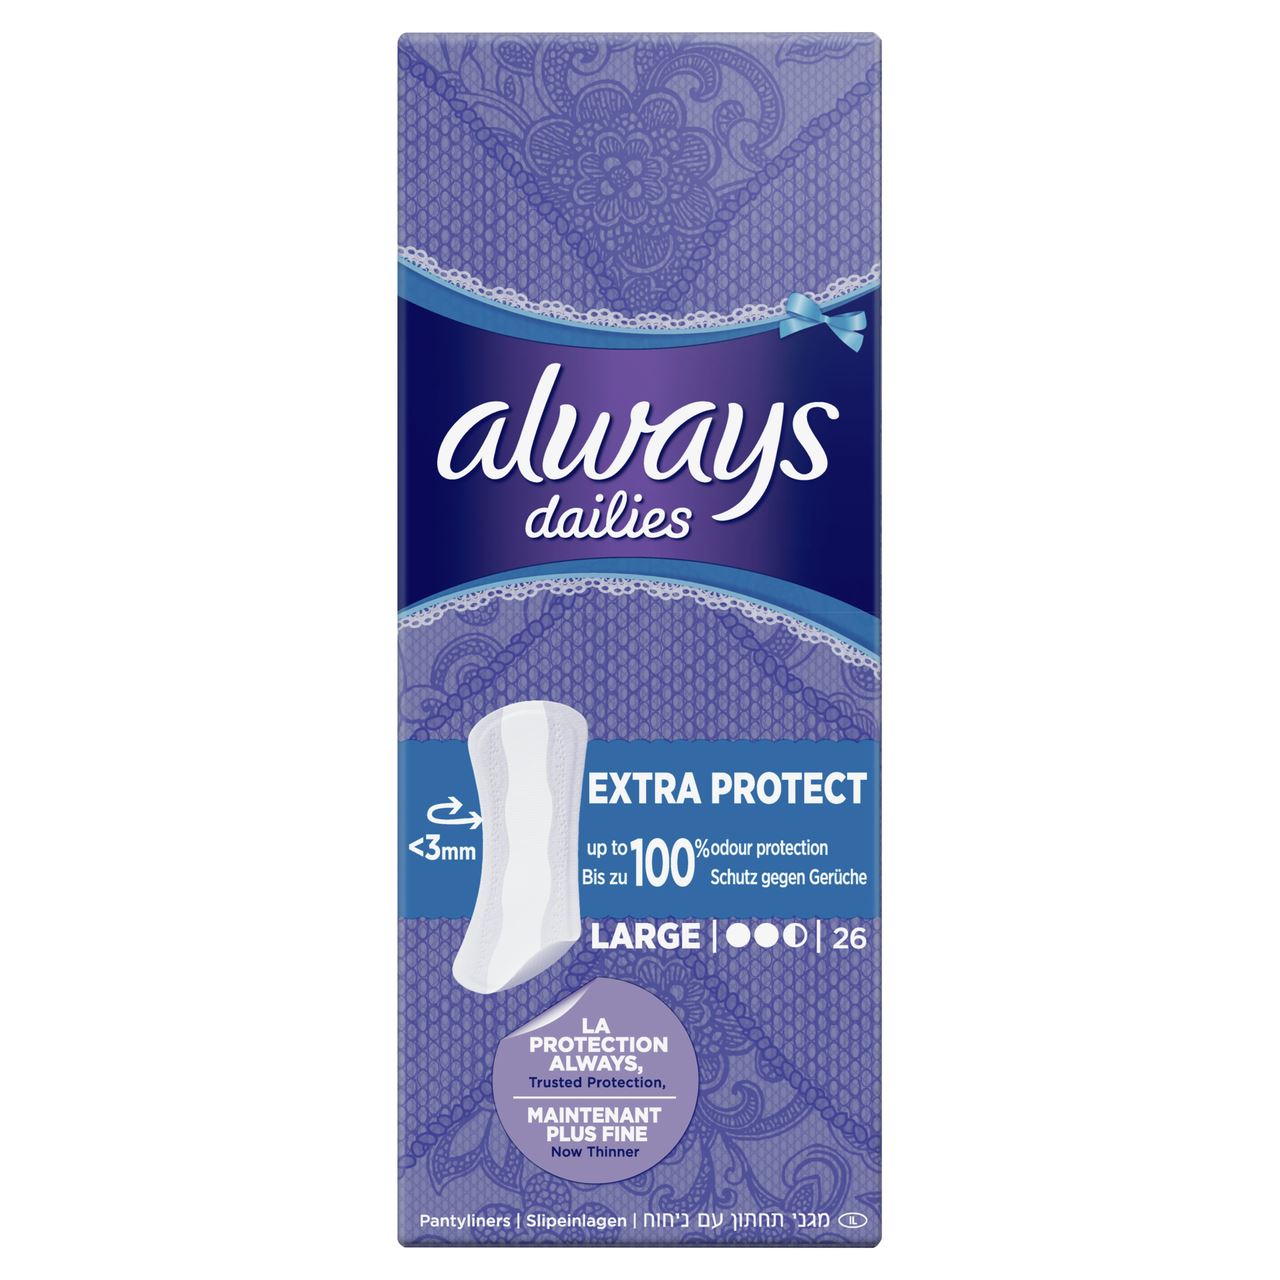 Protège slip Large Extra Protect x 26 Always